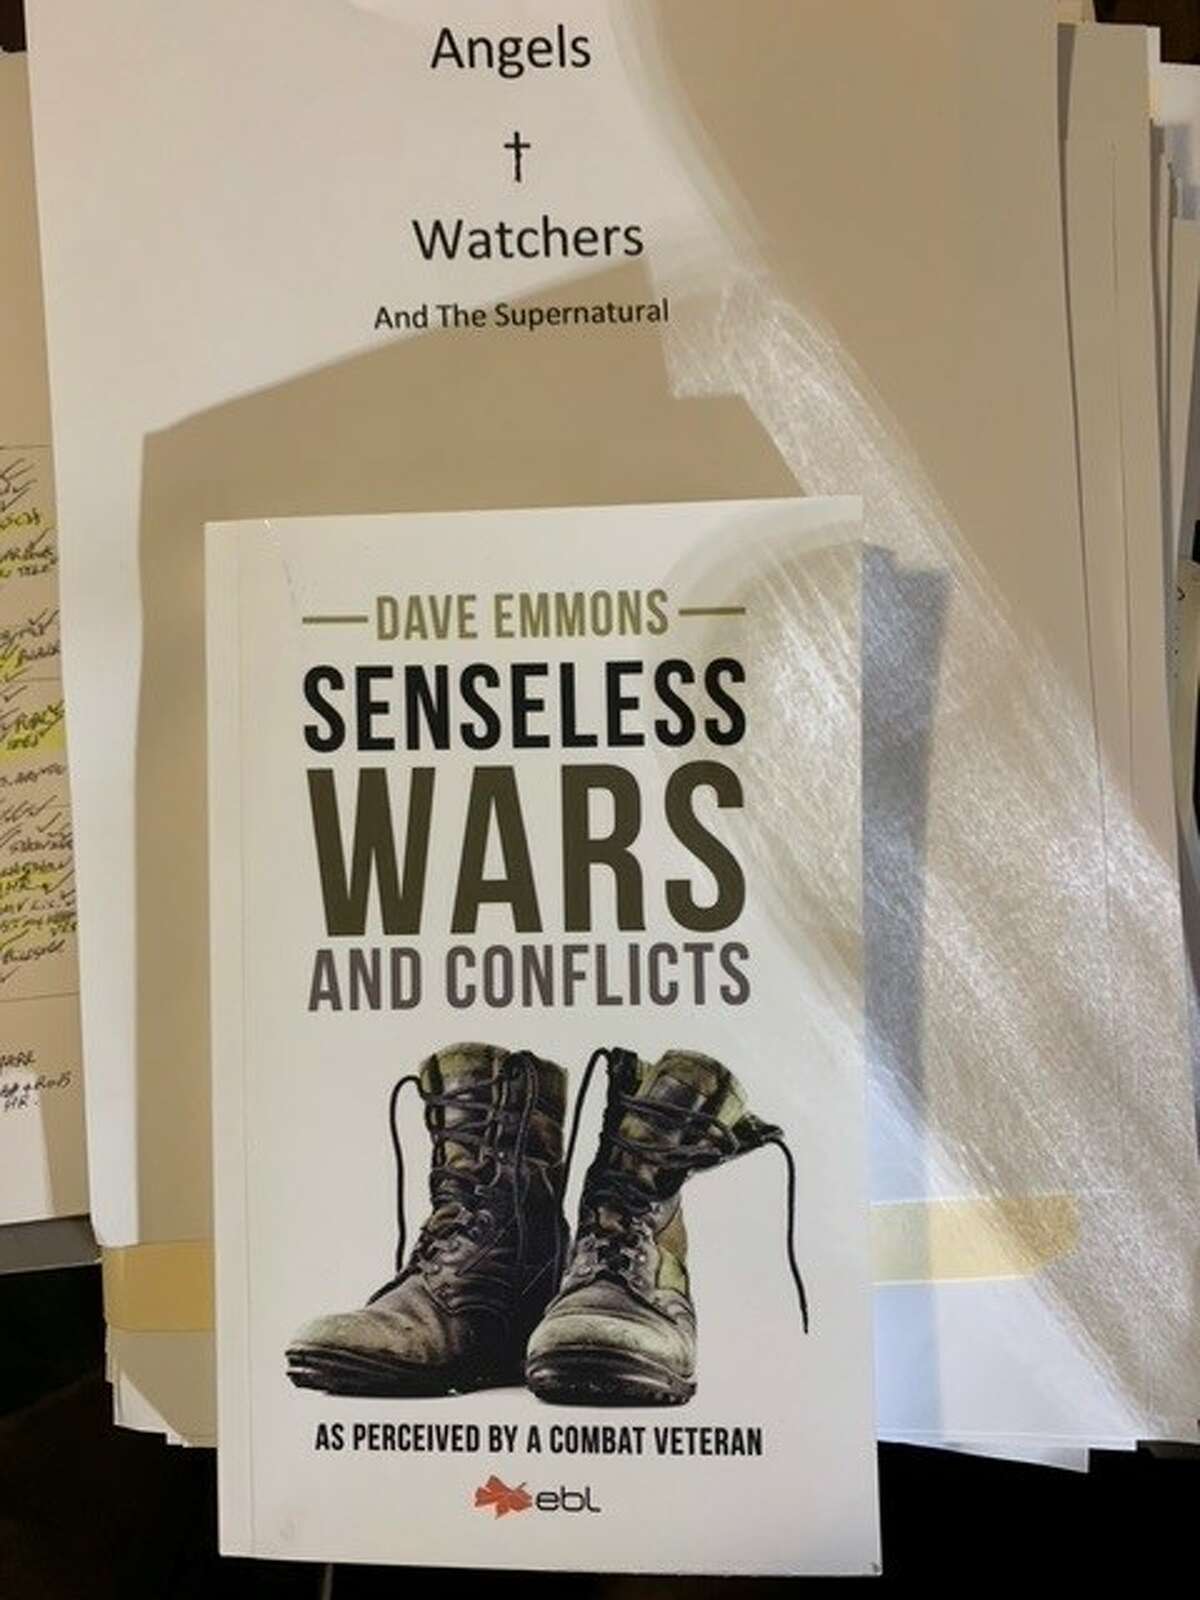 “Senseless Wars and Conflicts: As Perceived by a Combat Veteran,” by Dave Emmons, is available where most books are sold. A hard copy manuscript of “Angels and Watchers” is upright behind a copy of the newly published book. “Angels and Watchers,” by Emmons, is almost complete and about the supernatural. Emmons will do a signing of “Senseless Wars and Conflicts" from 9 a.m.-noon Saturday, Oct. 8, at Hayner Public Library, 326 Belle St., in Alton.